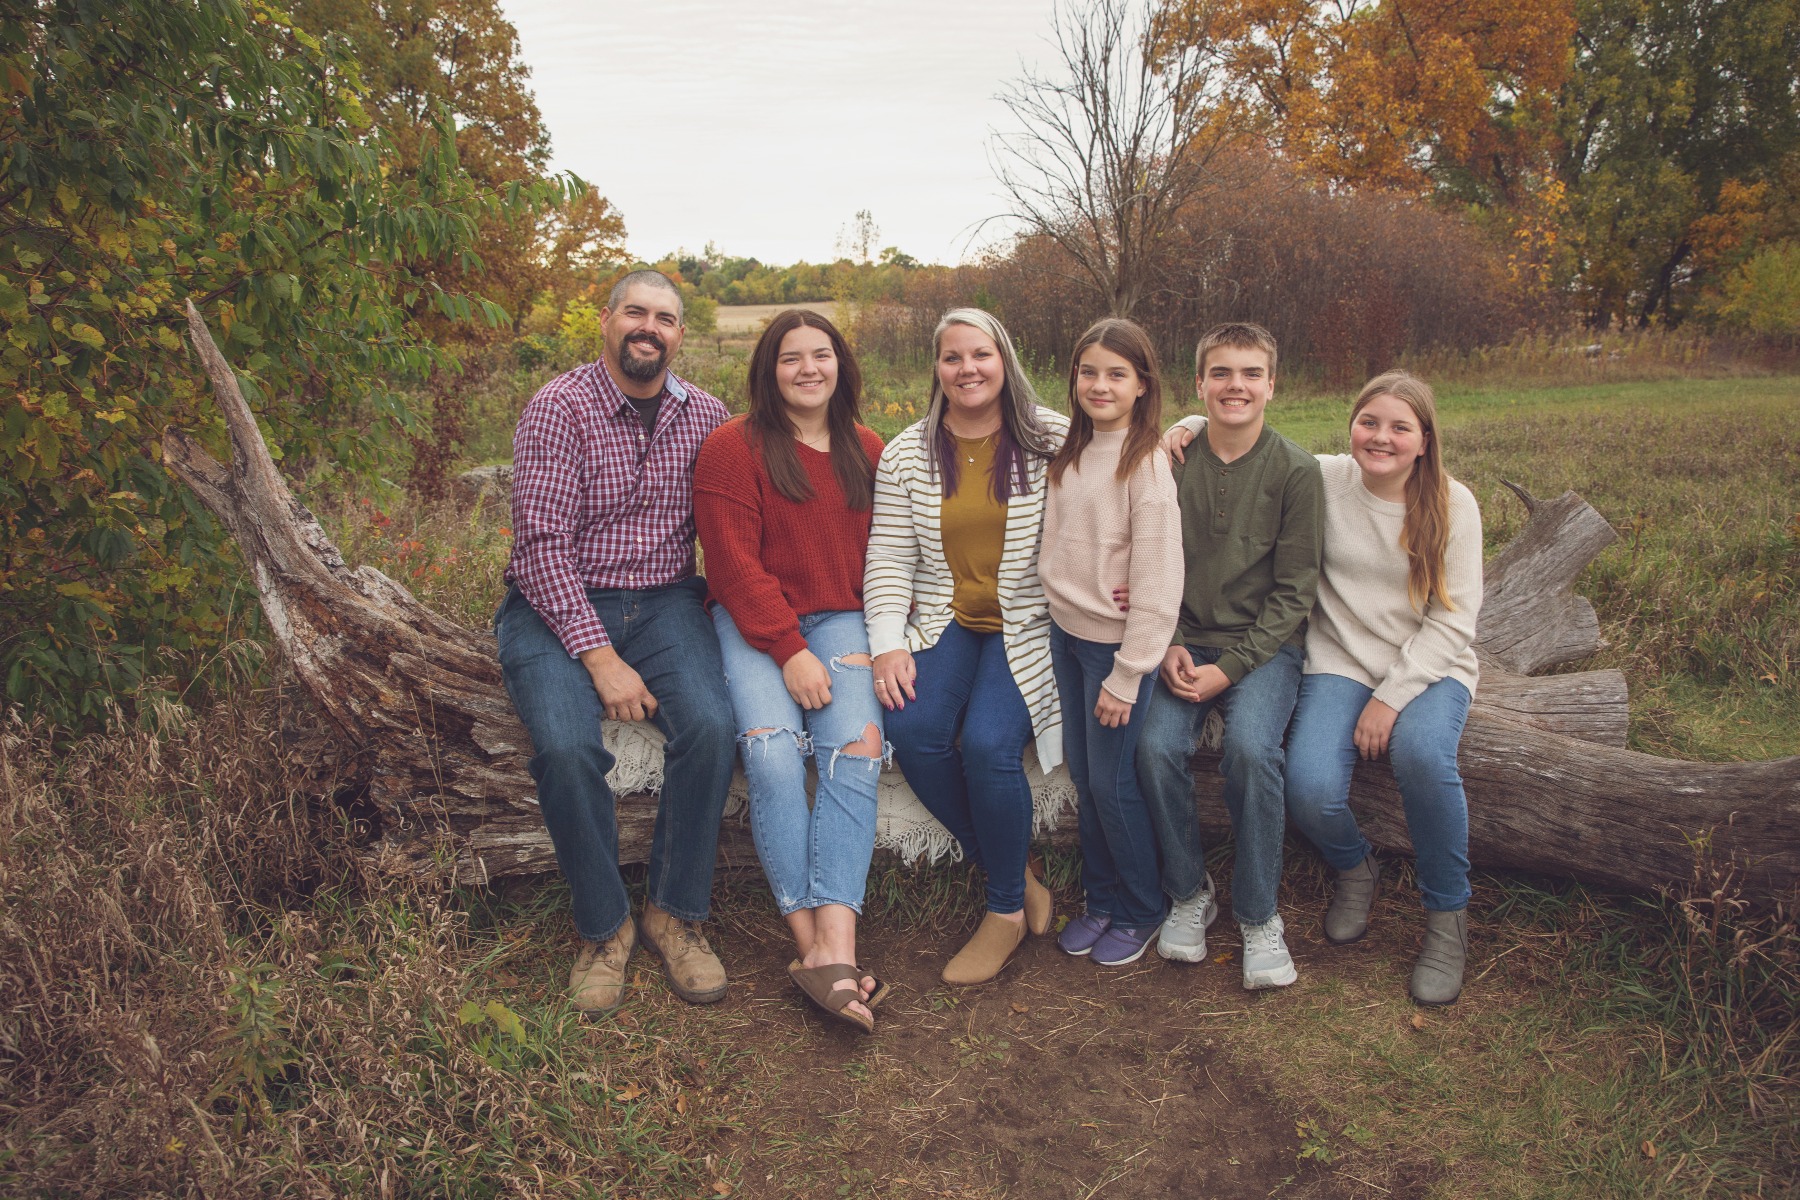 family of 6 pose for a photo on a tree log in a fall setting